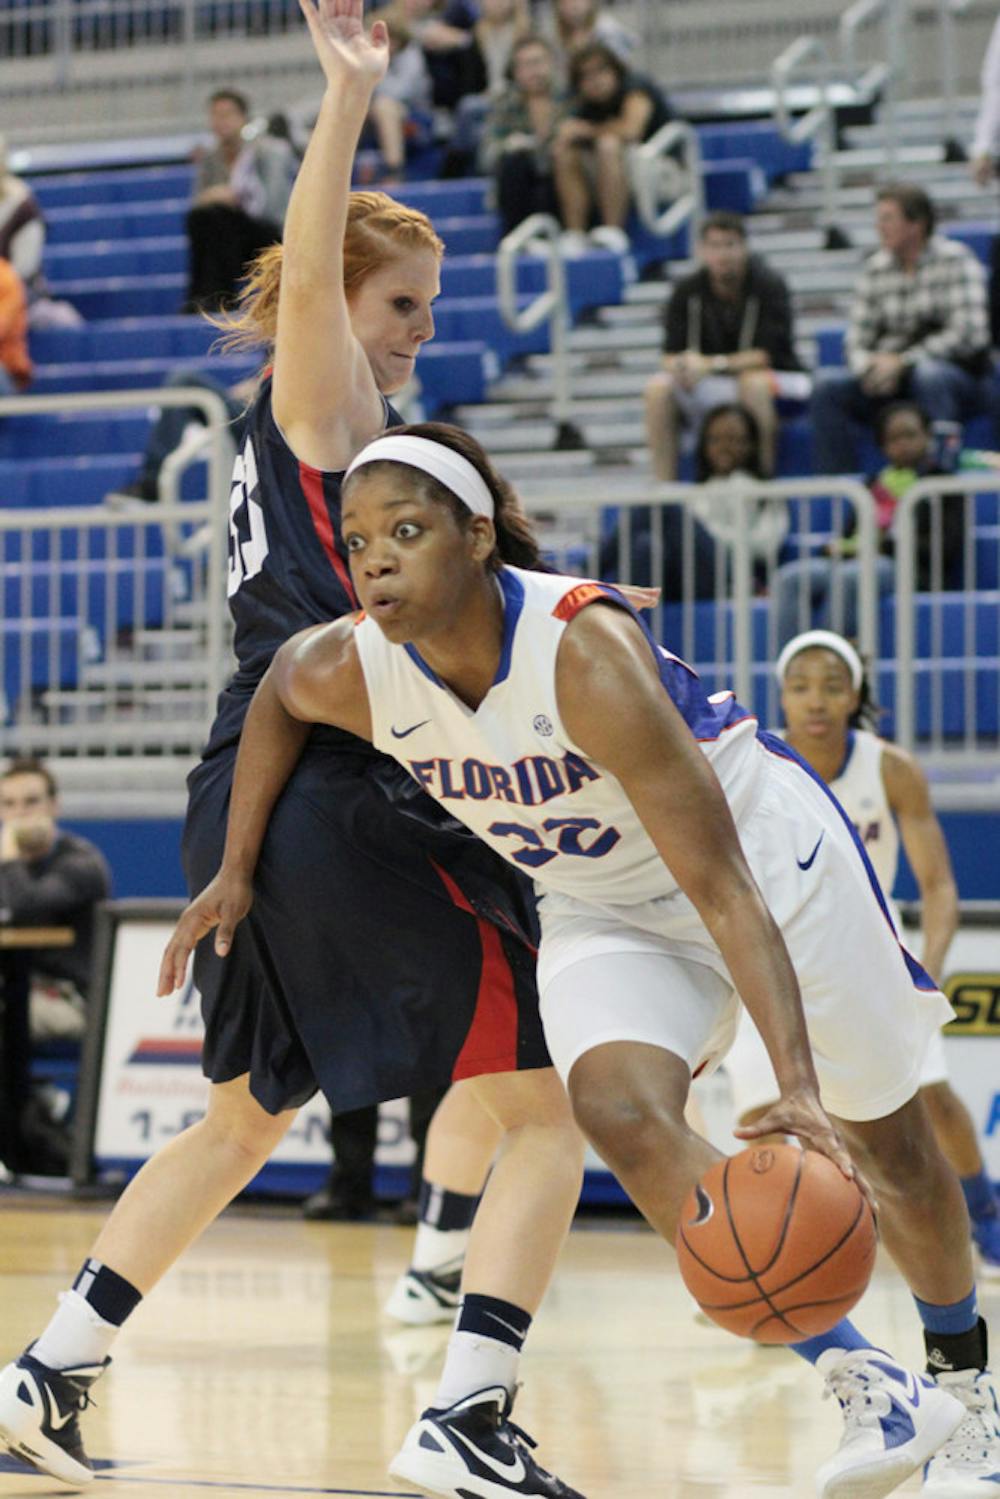 <p><span>Forward Jennifer George drives along the baseline during Florida’s 72-45 win against Belmont on Nov. 29, 2011, in the O’Connell Center. </span></p>
<div><span><br /></span></div>